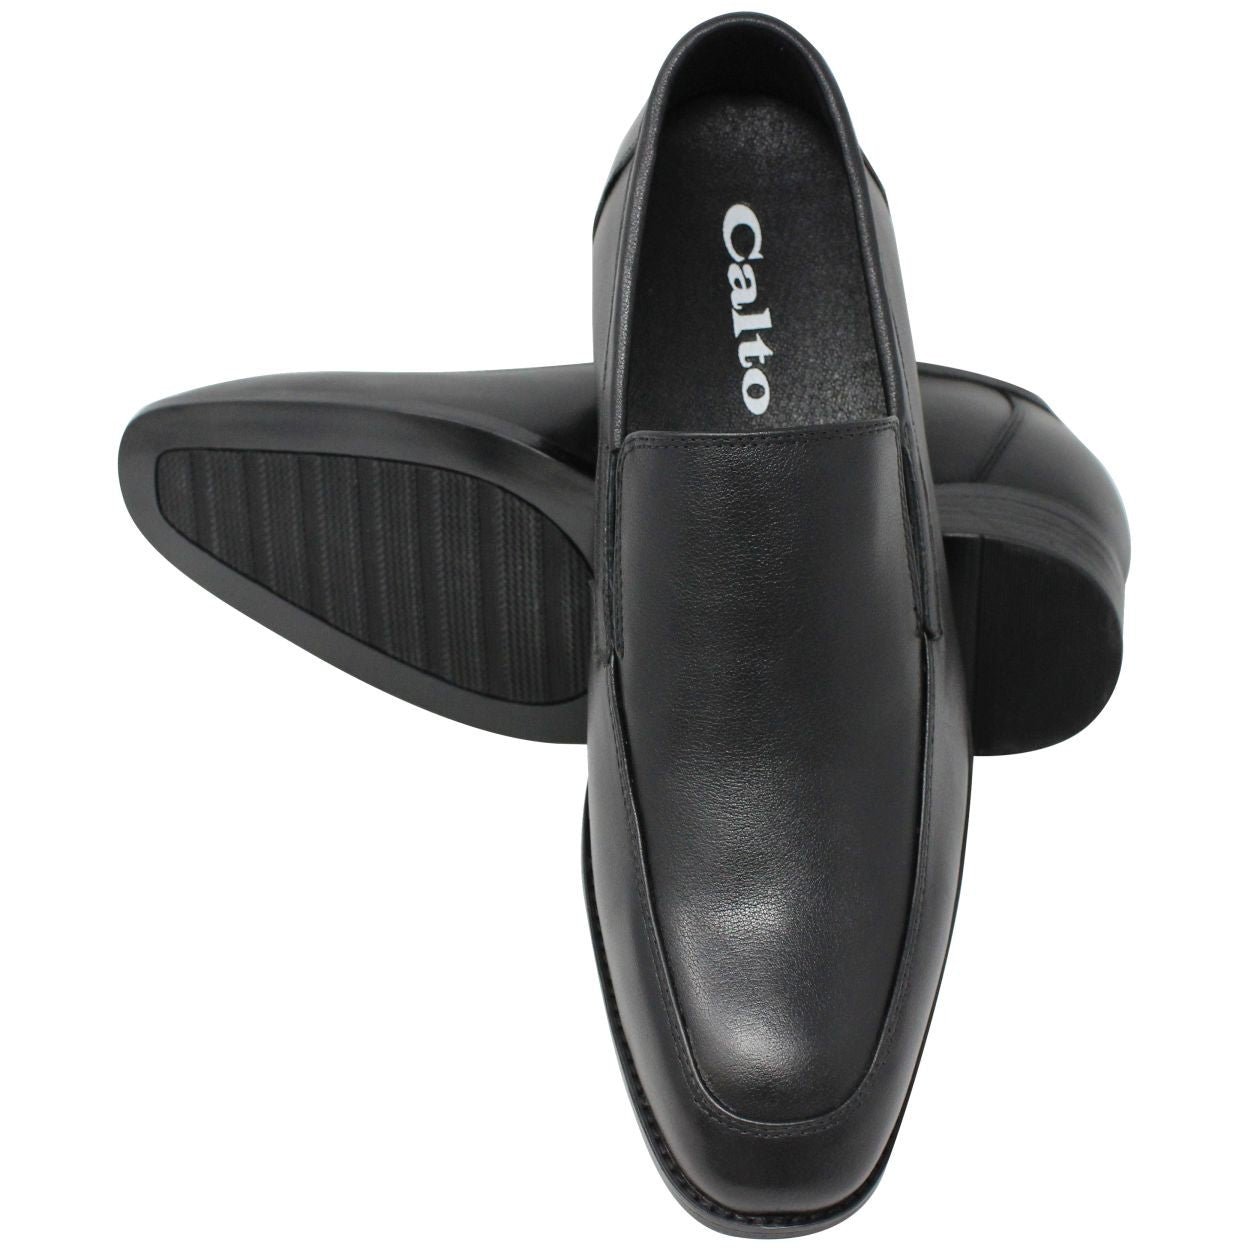 Elevator shoes height increase CALTO - Y40112 - 3.2 Inches Taller (Black)